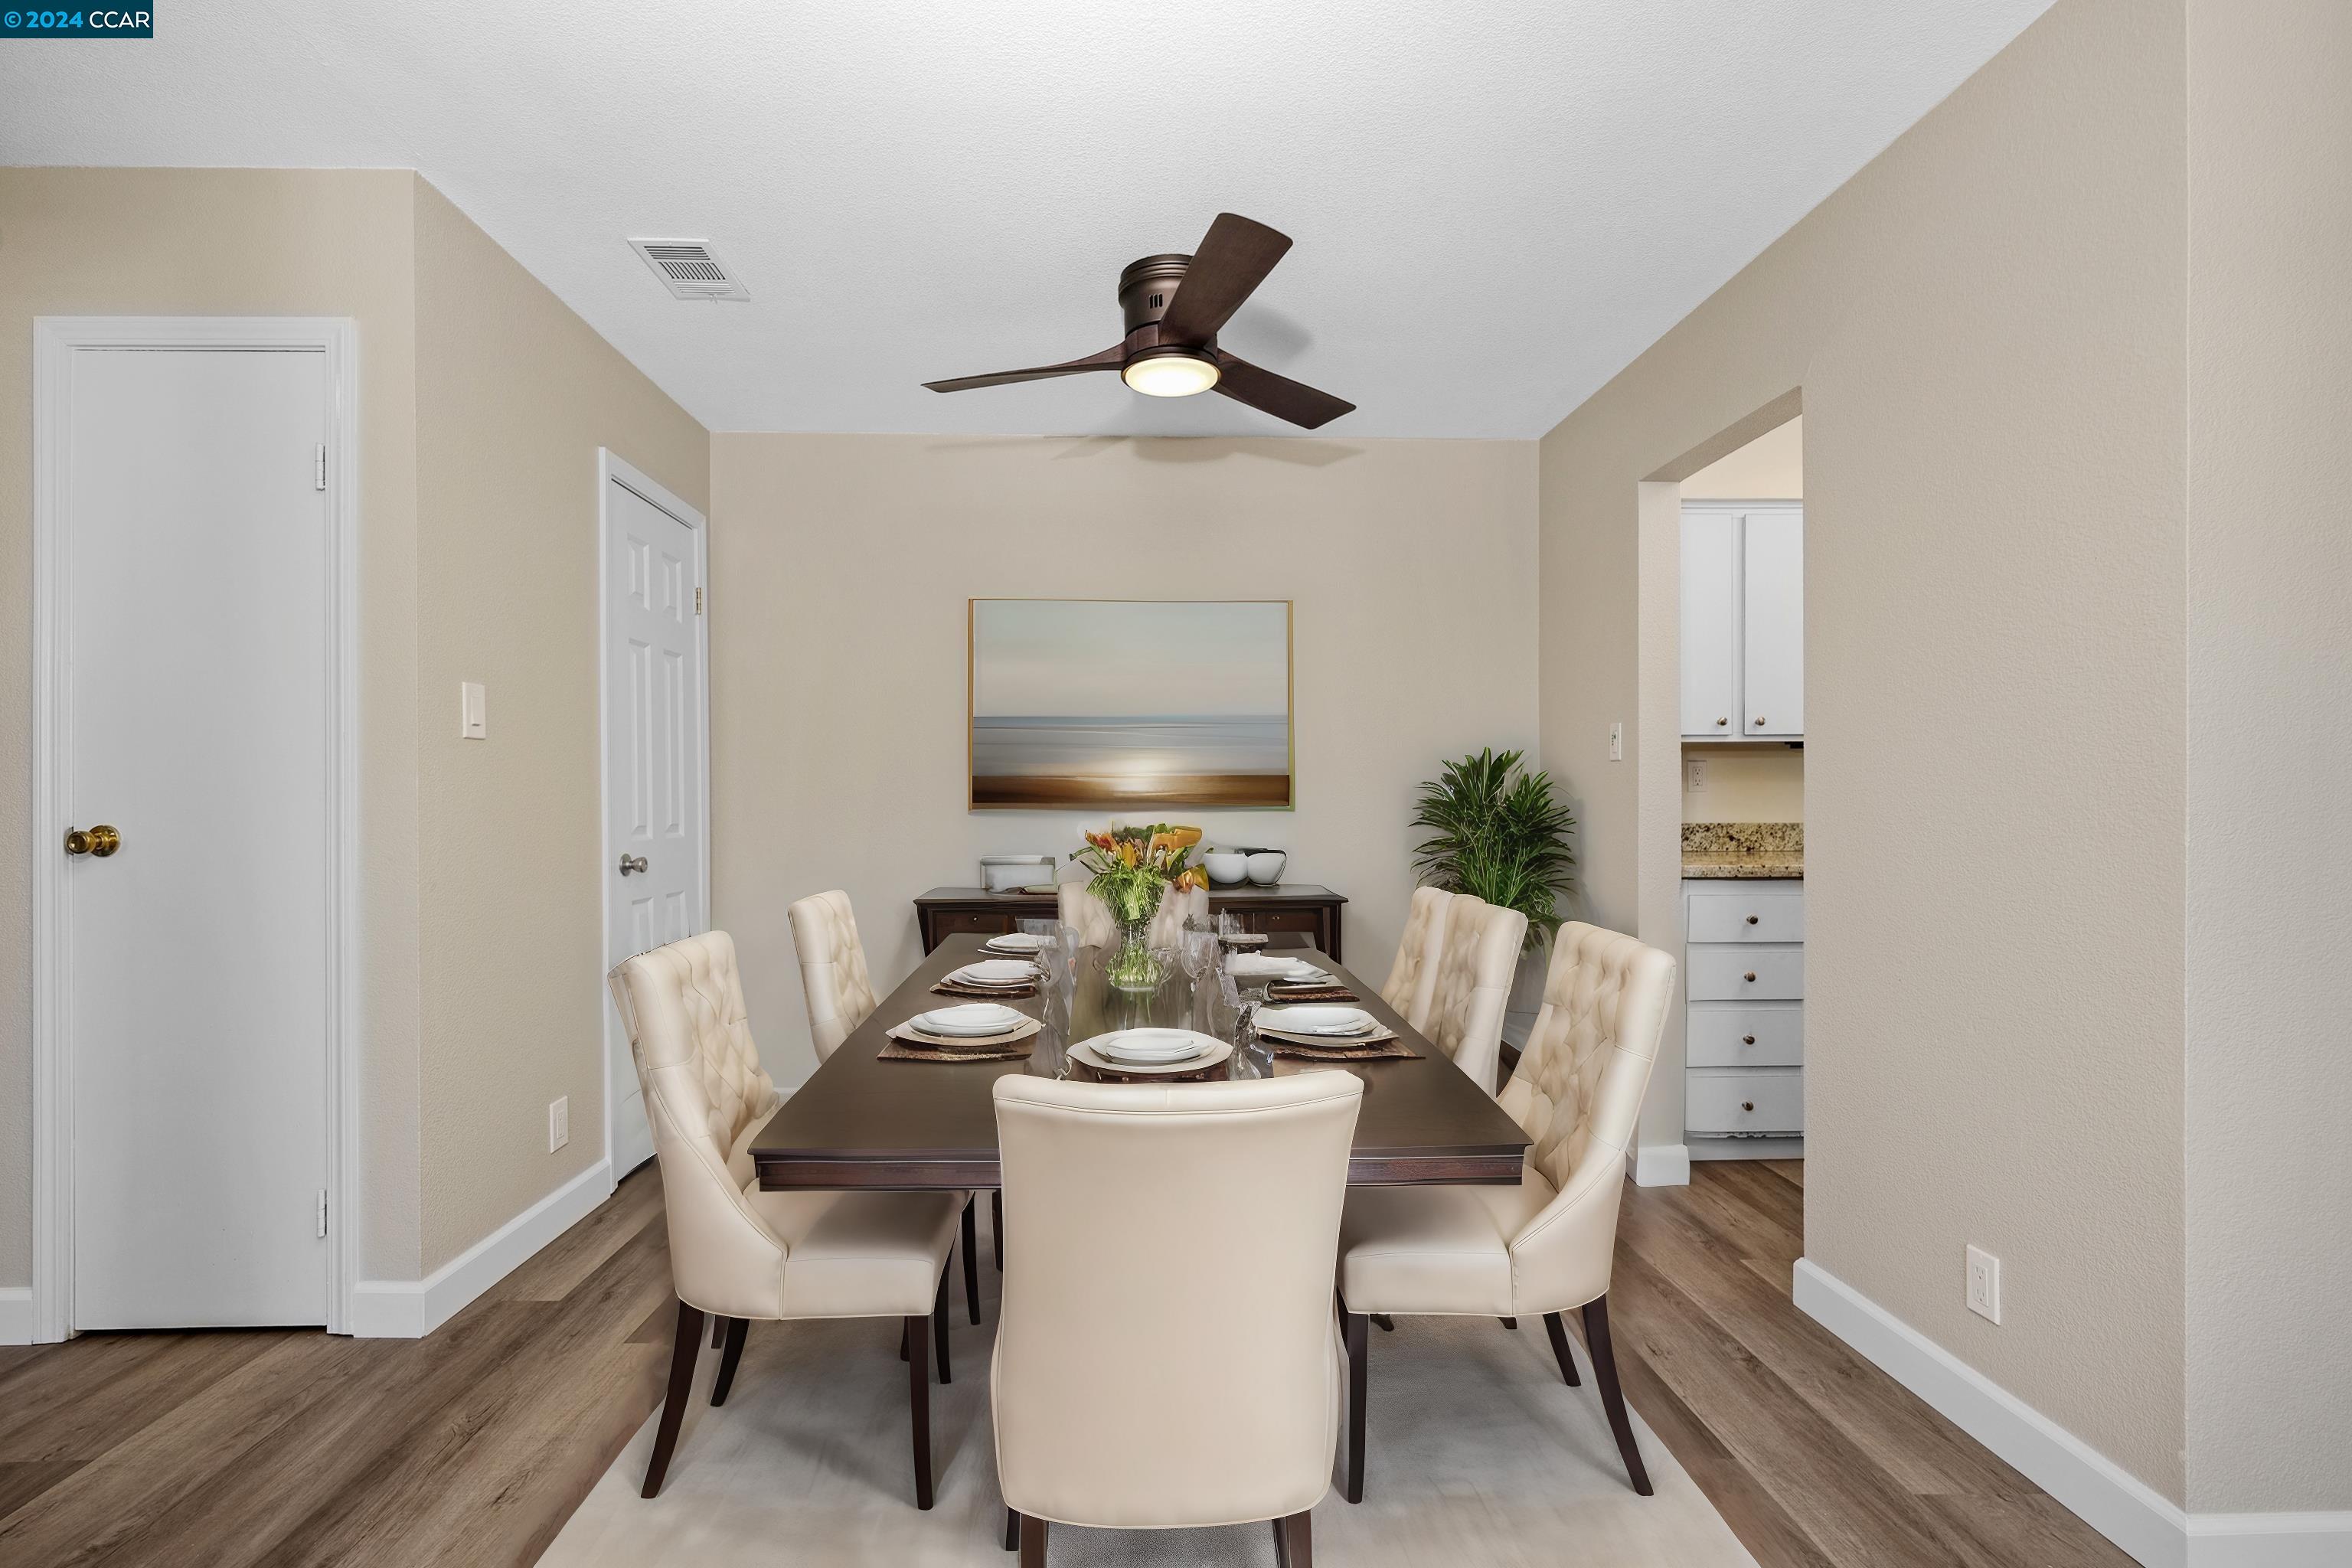 Spacious dining area adjacent to kitchen